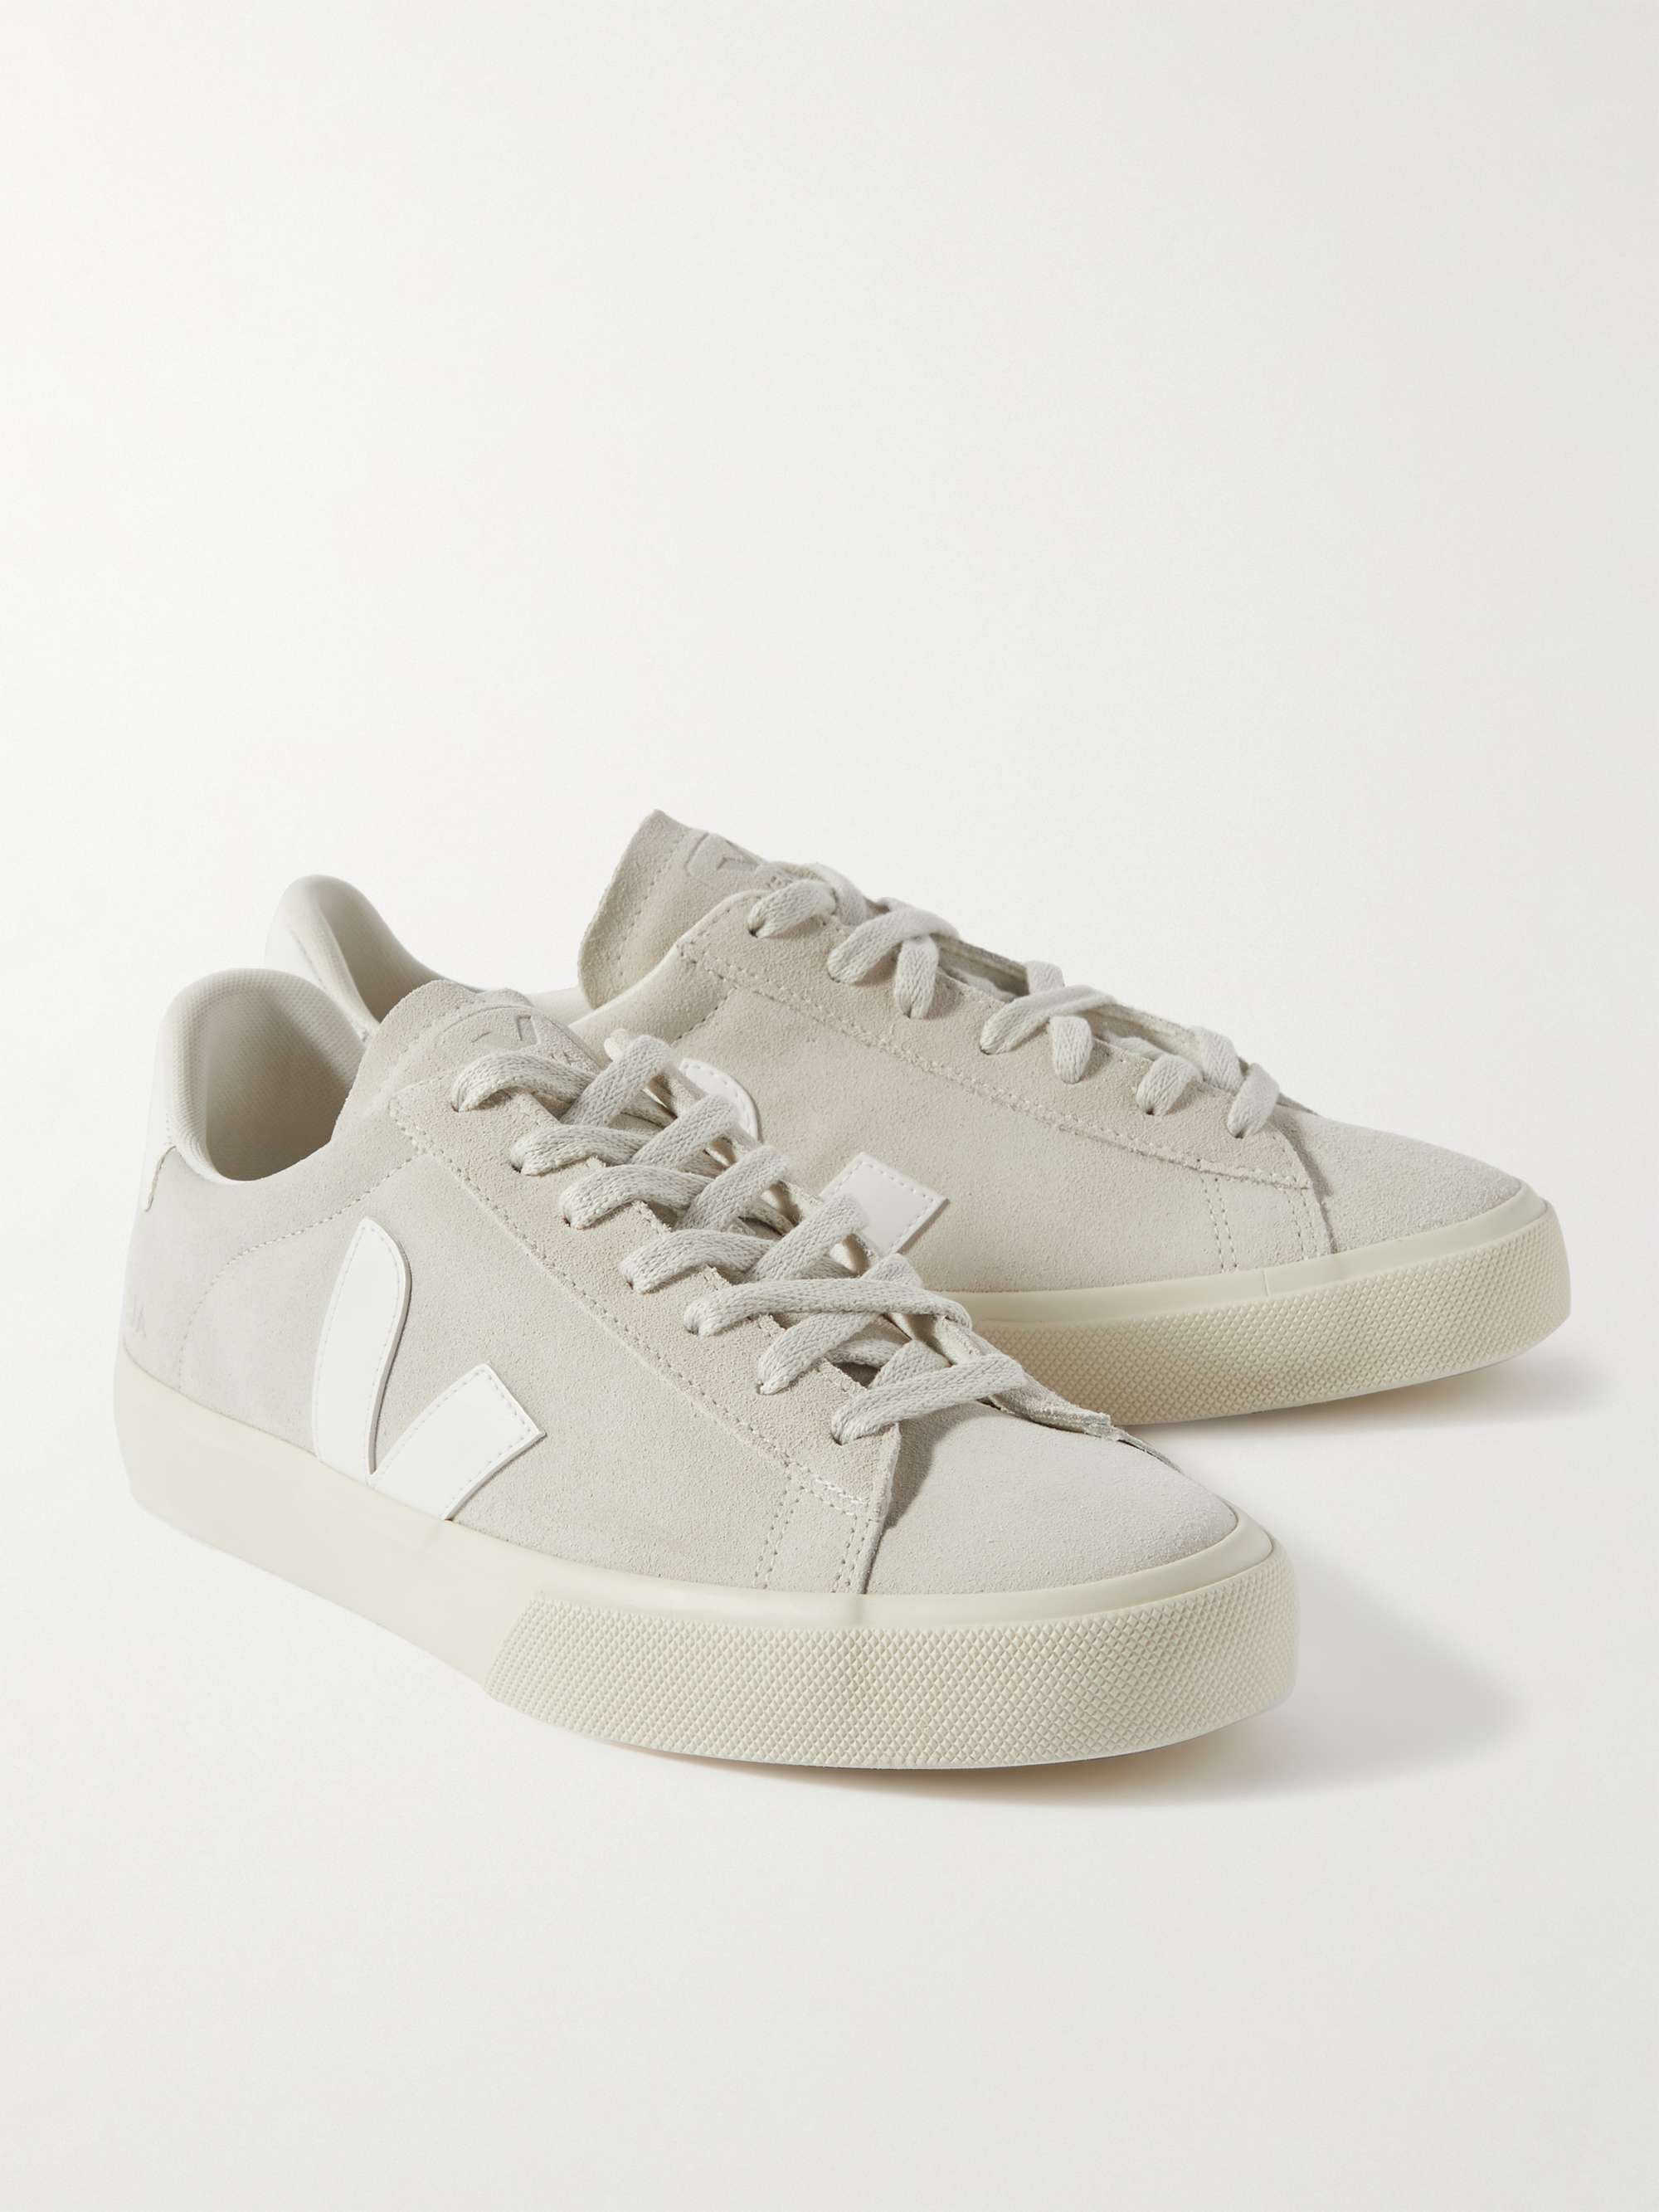 VEJA Campo Leather-Trimmed Suede Sneakers | MR PORTER